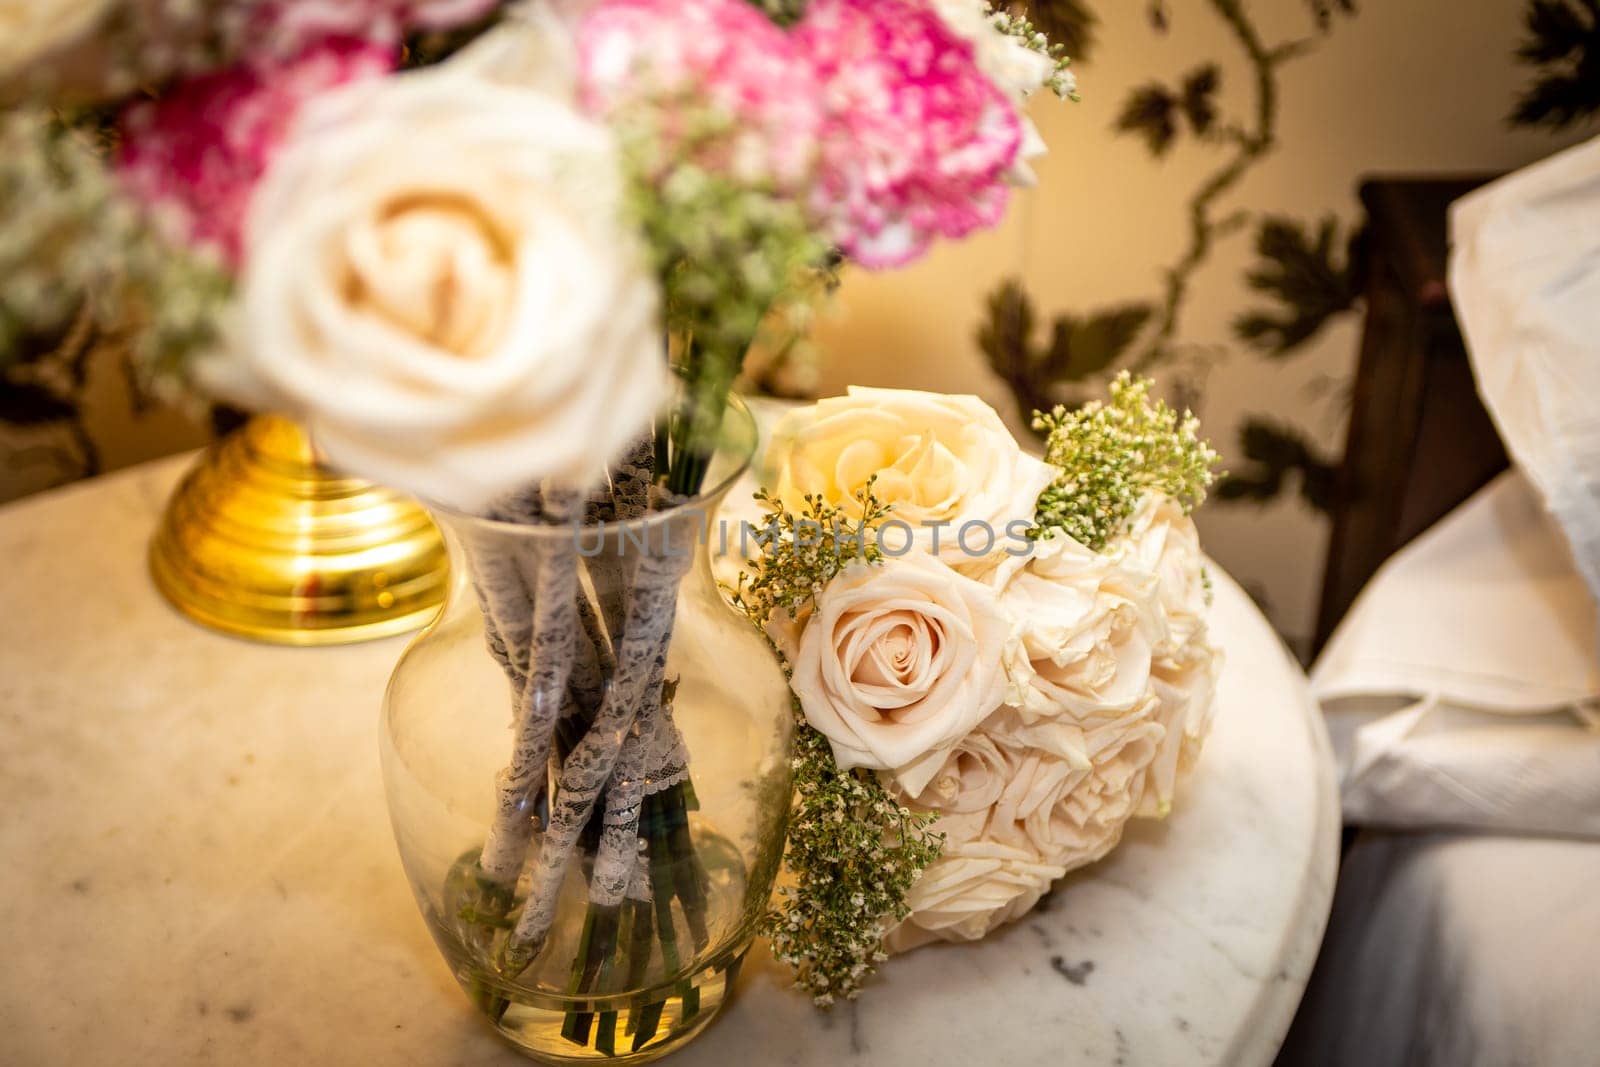 Floral Arrangement on the Table in the bridal Suite